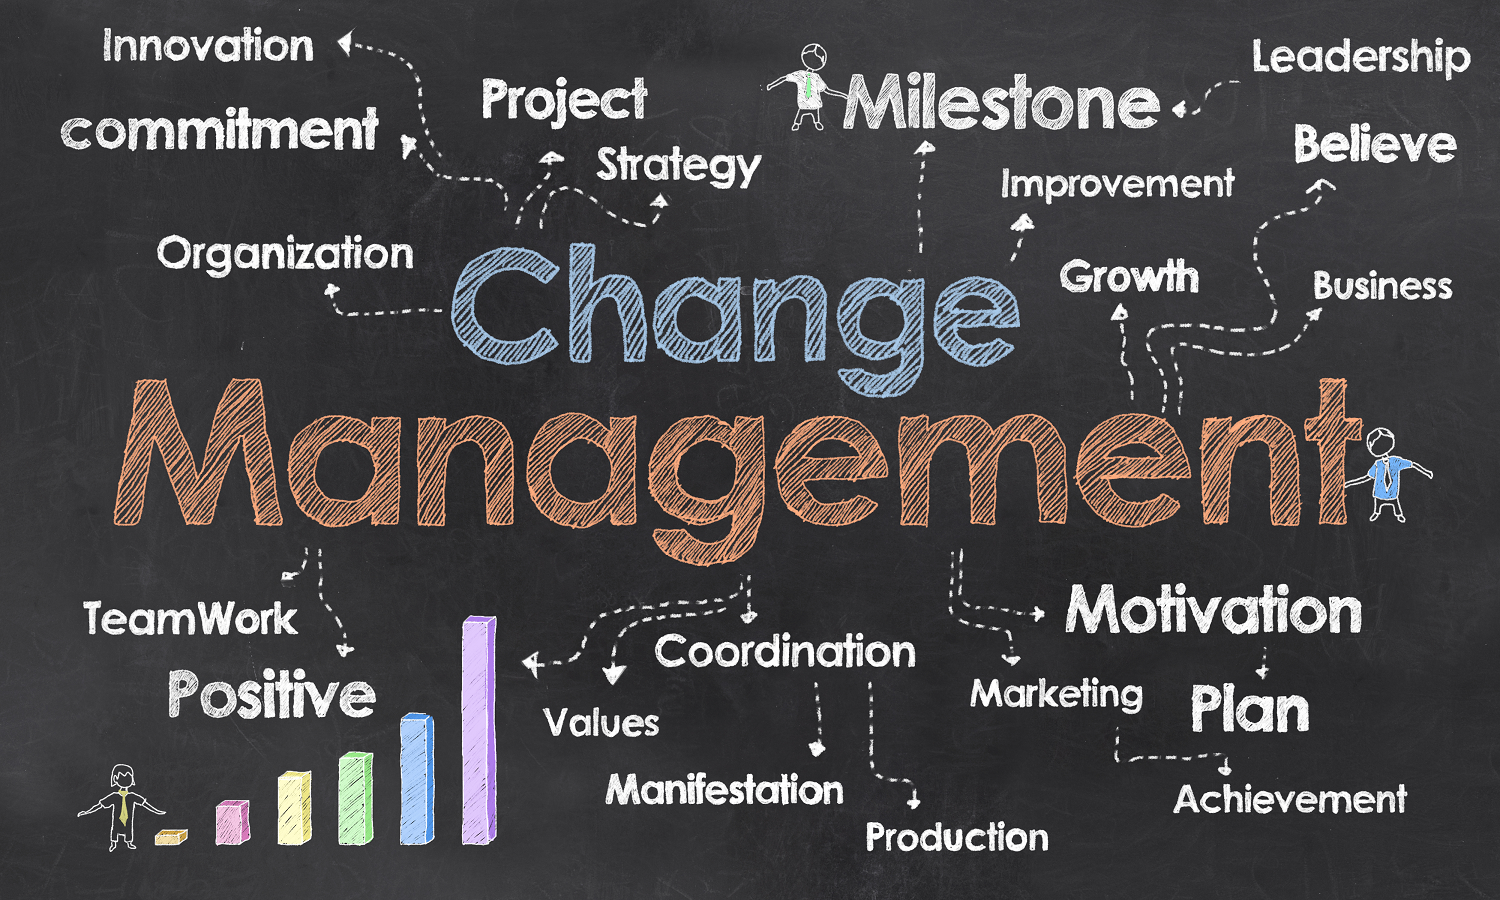 Why Project Management is Important for Change